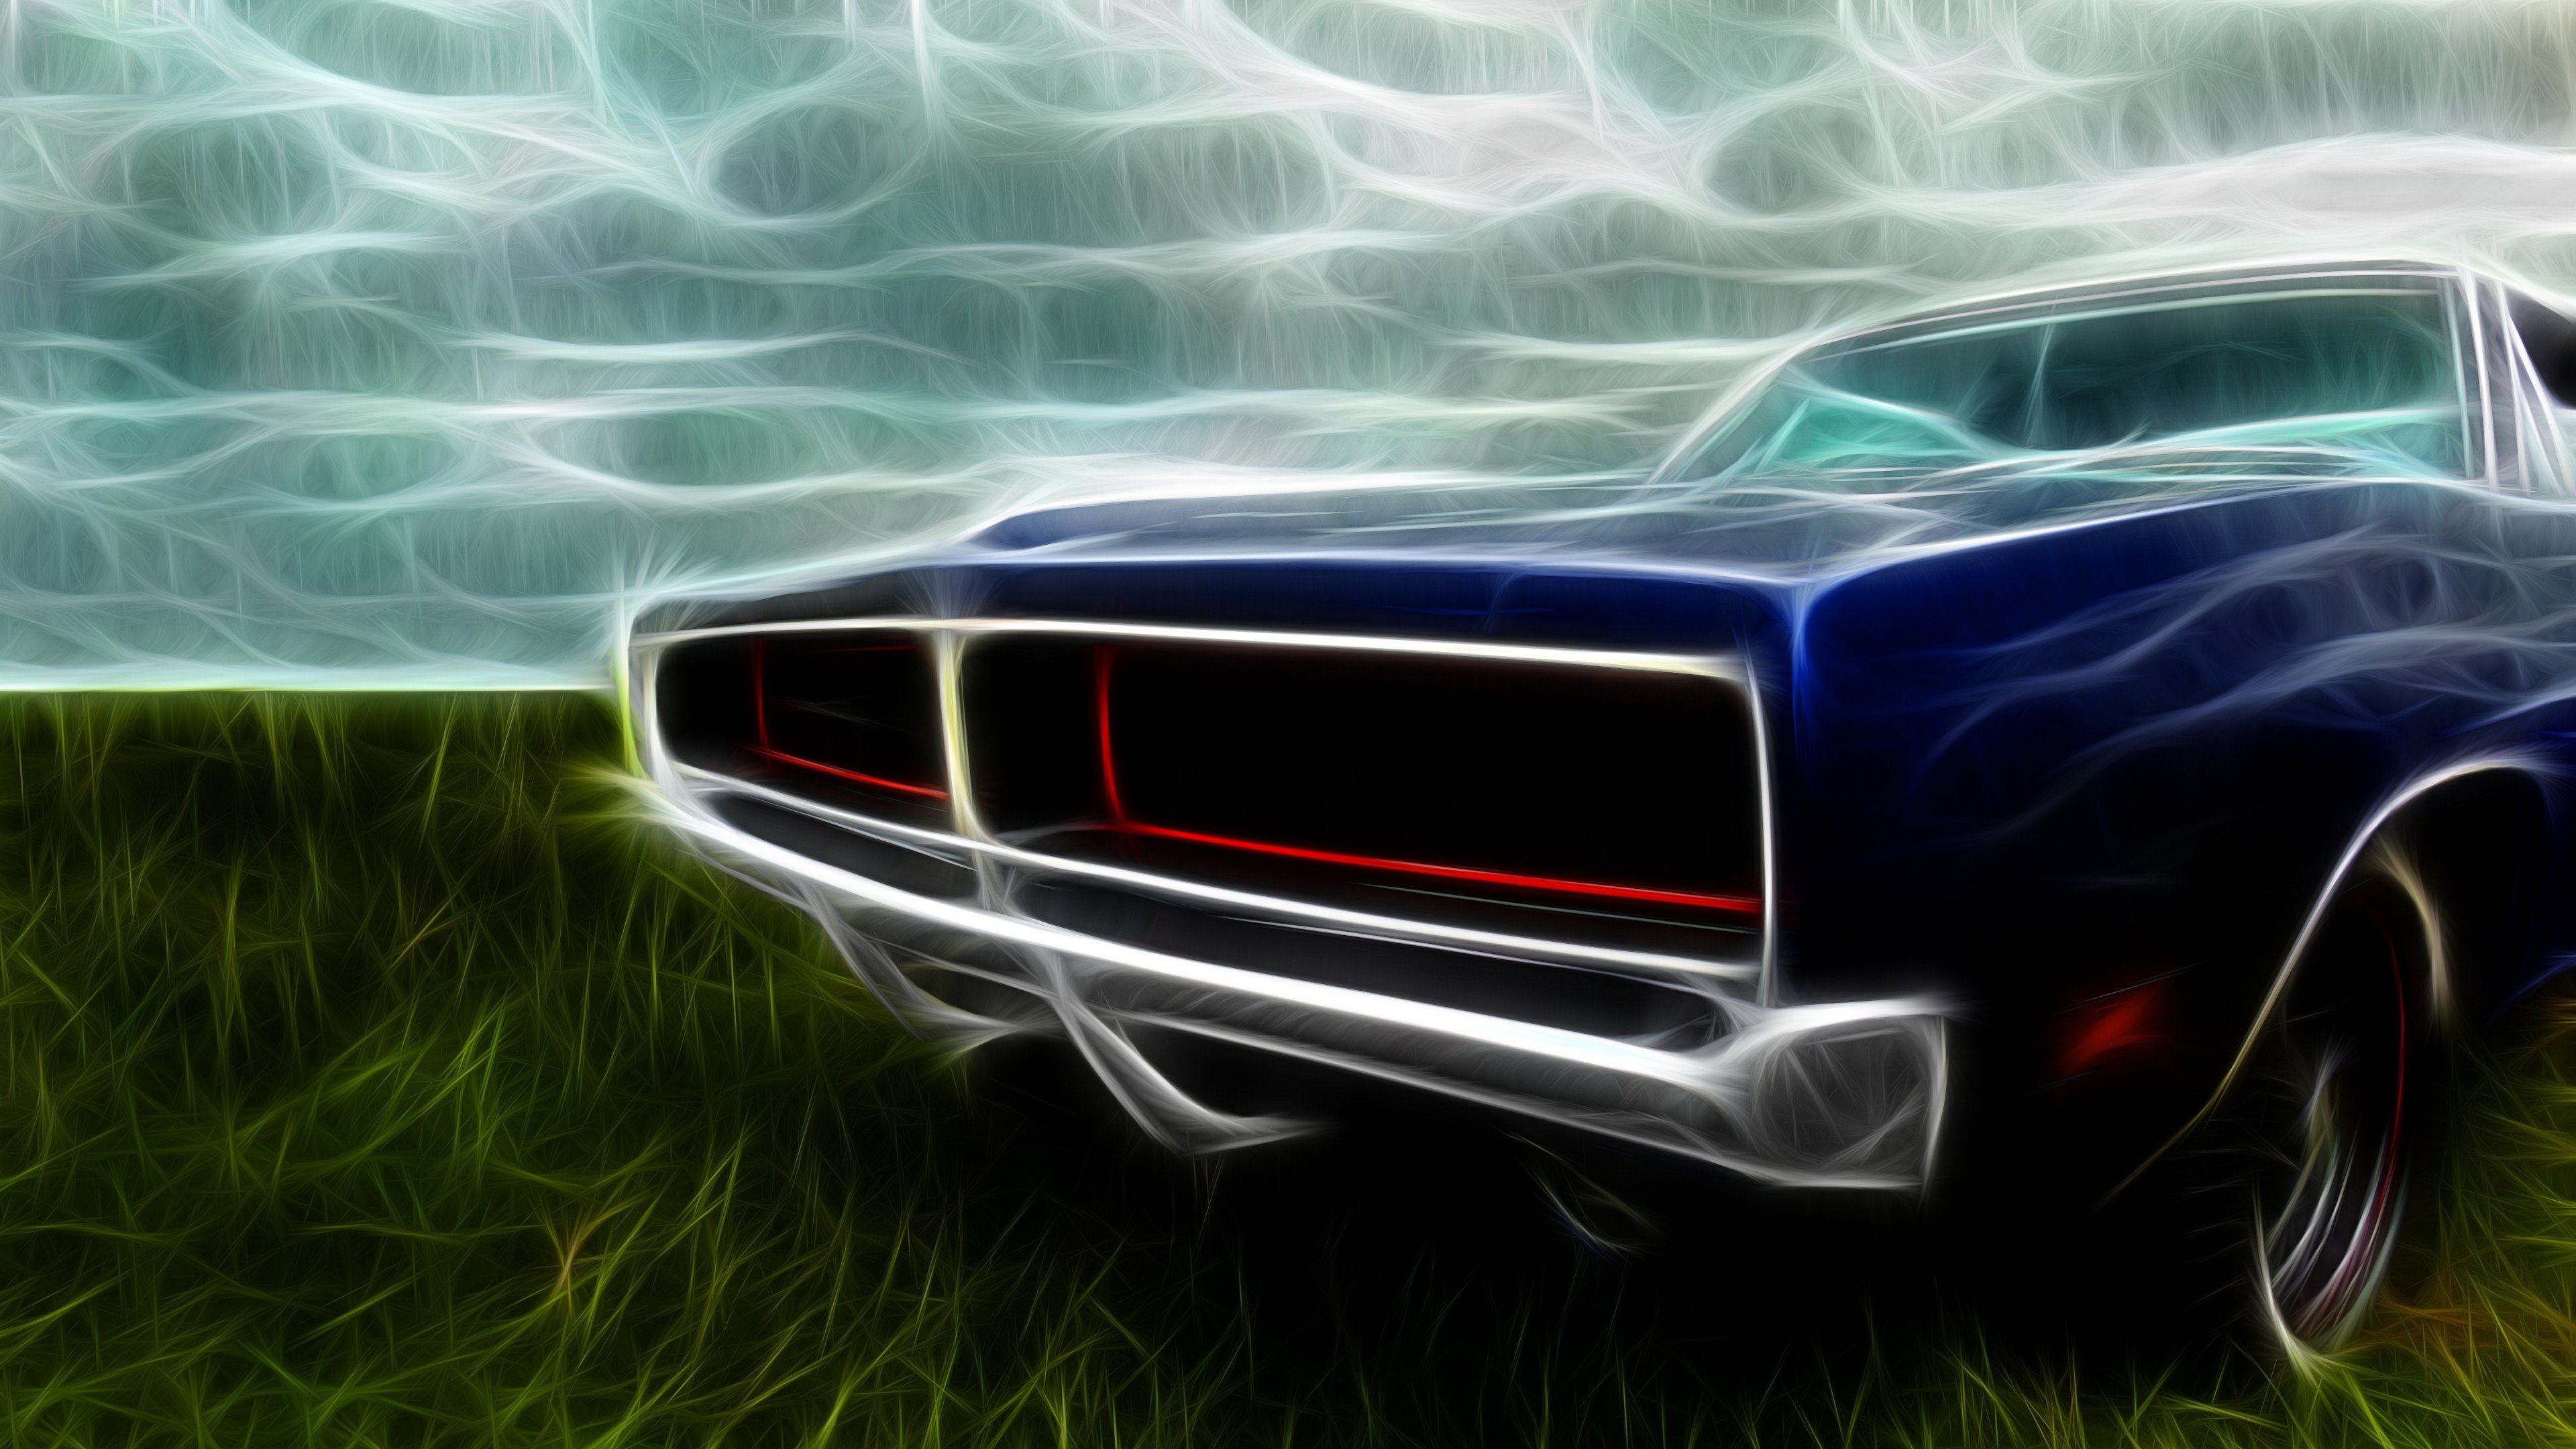 car, Dodge, Charger, Sky, Grass, Blue, Green, White, Gray, Black, Red Wallpaper